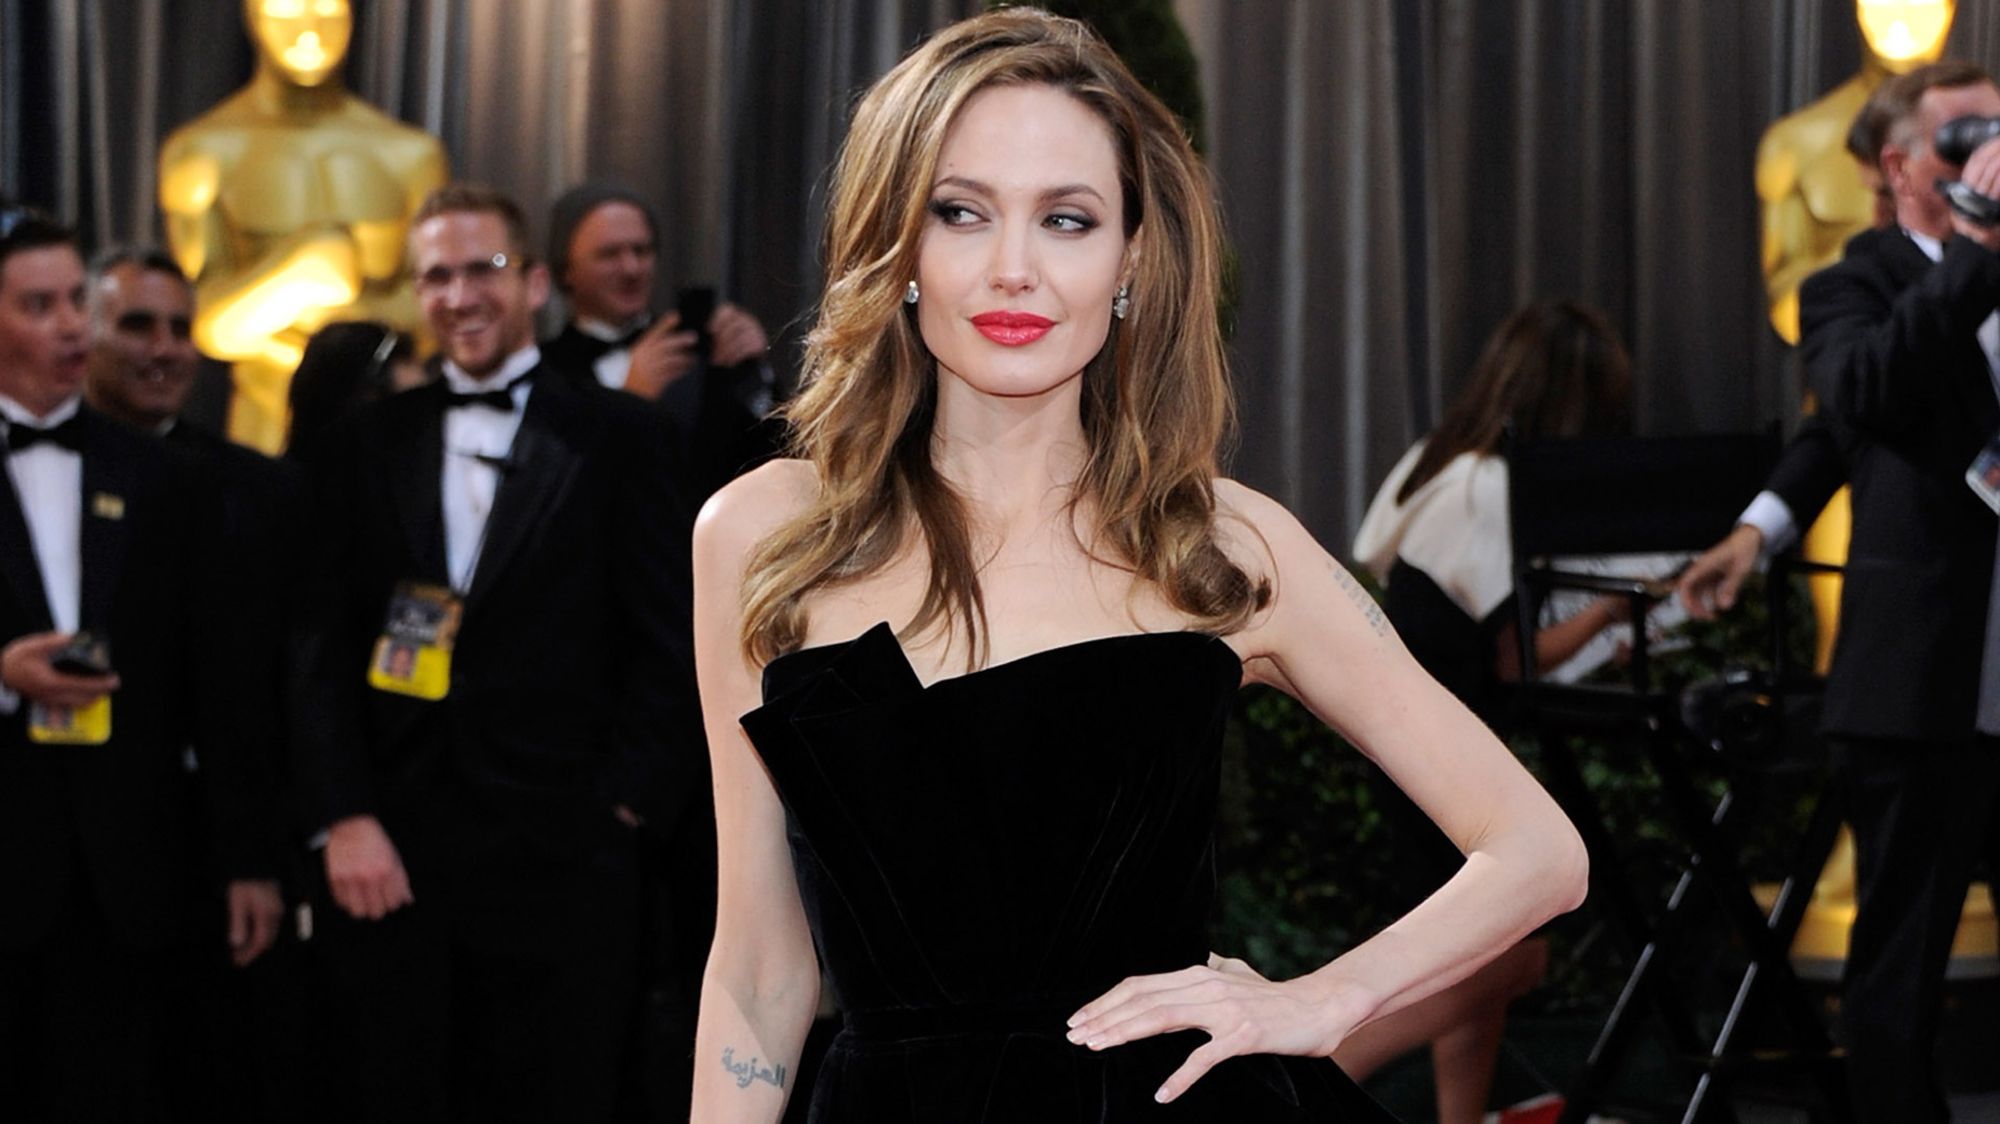 Angelina Jolie in Versace at the 84th Annual Academy Awards in February 2012.